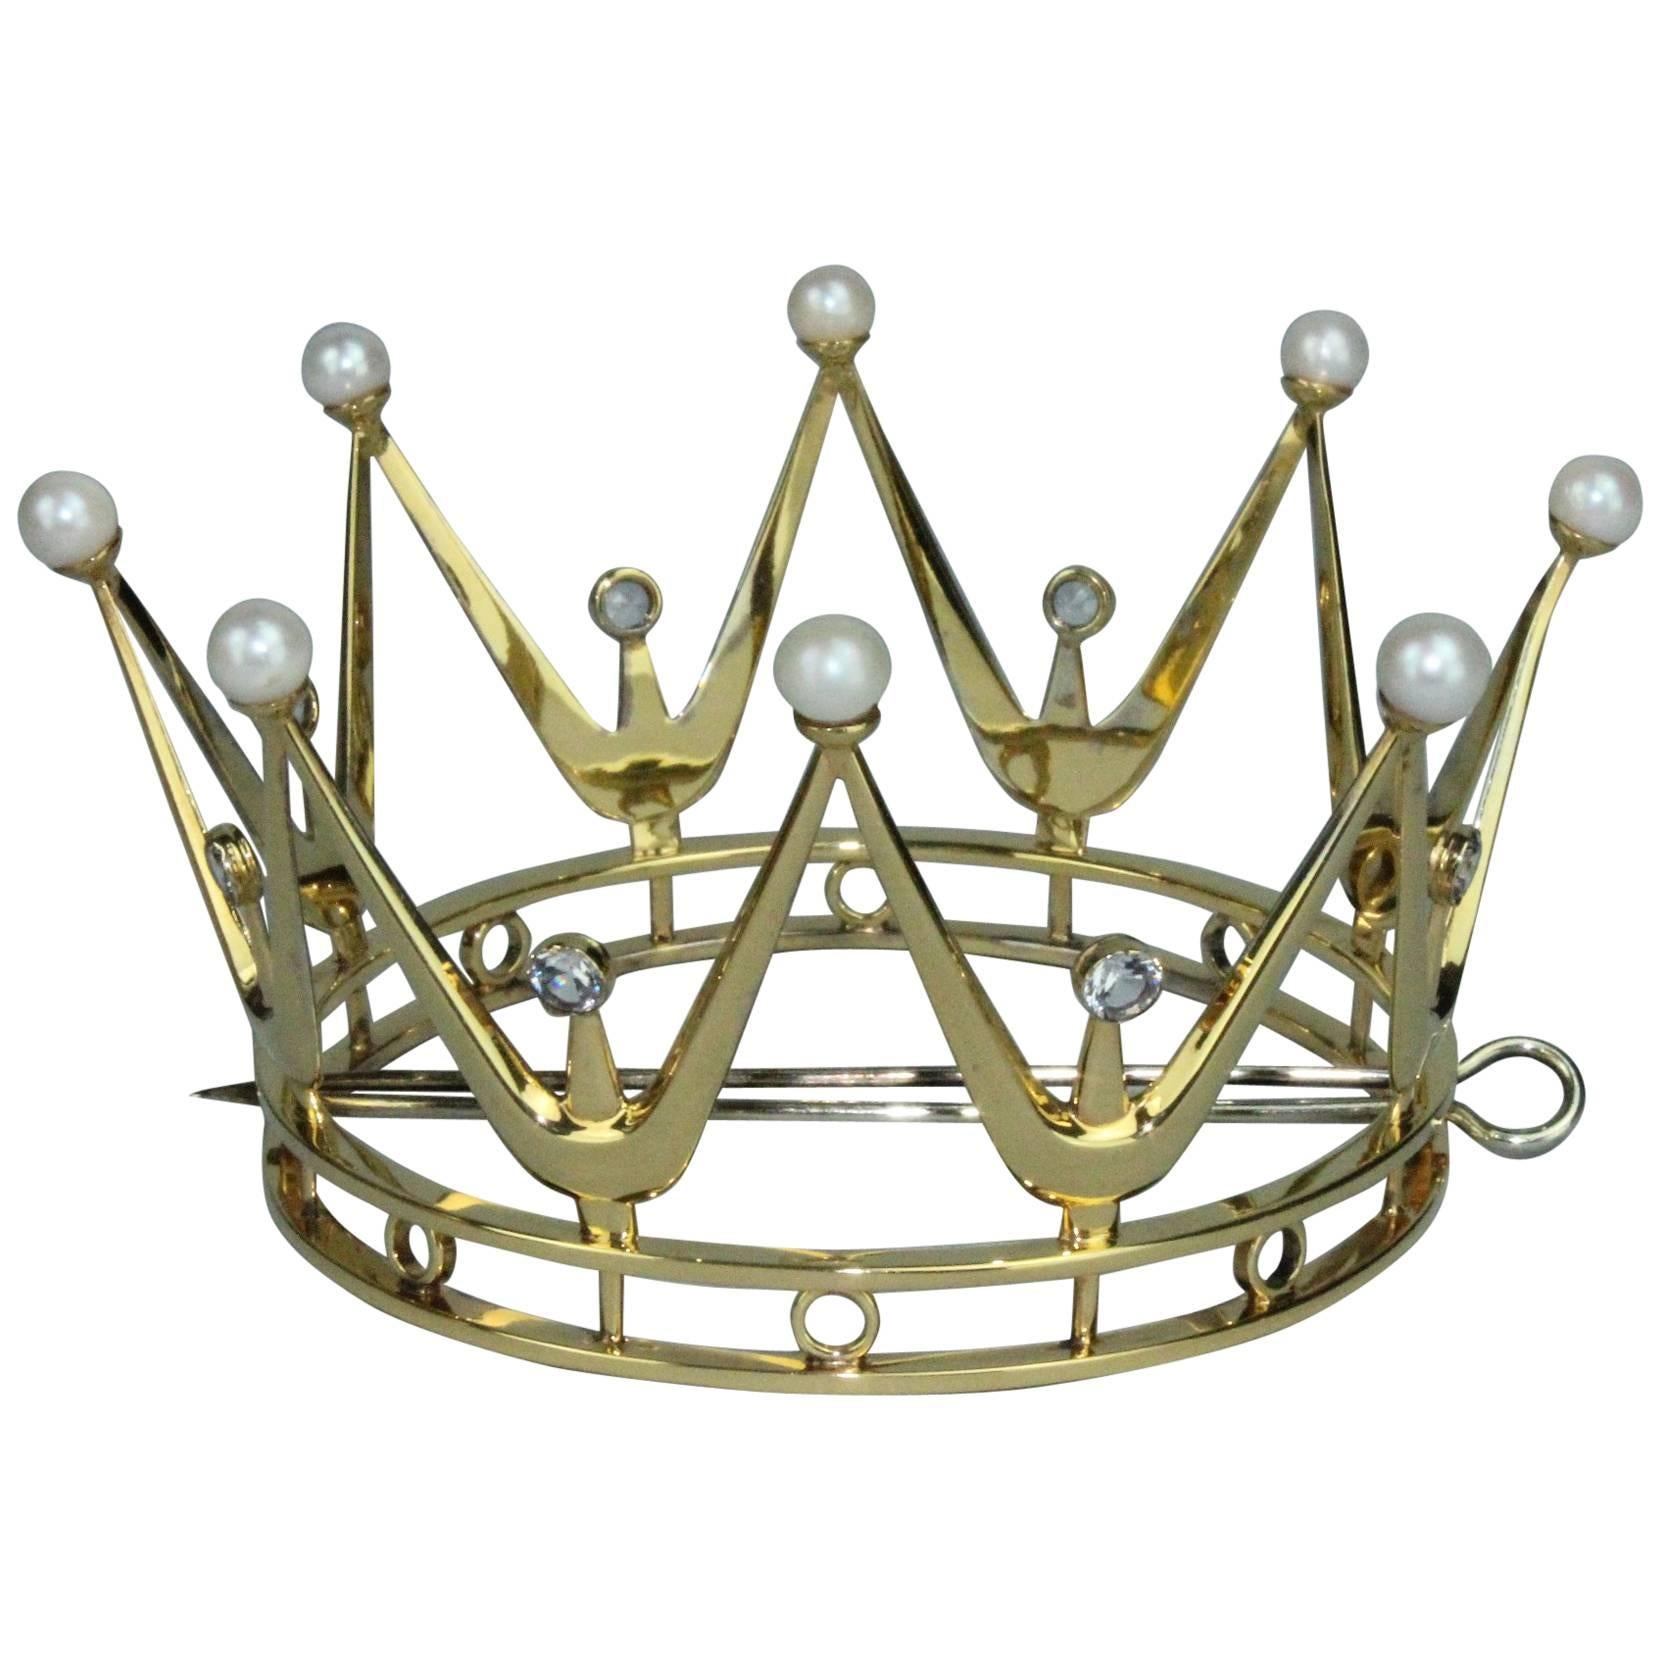 Bridal Crown in Gilt Silver, Pearls and Rock Crystal